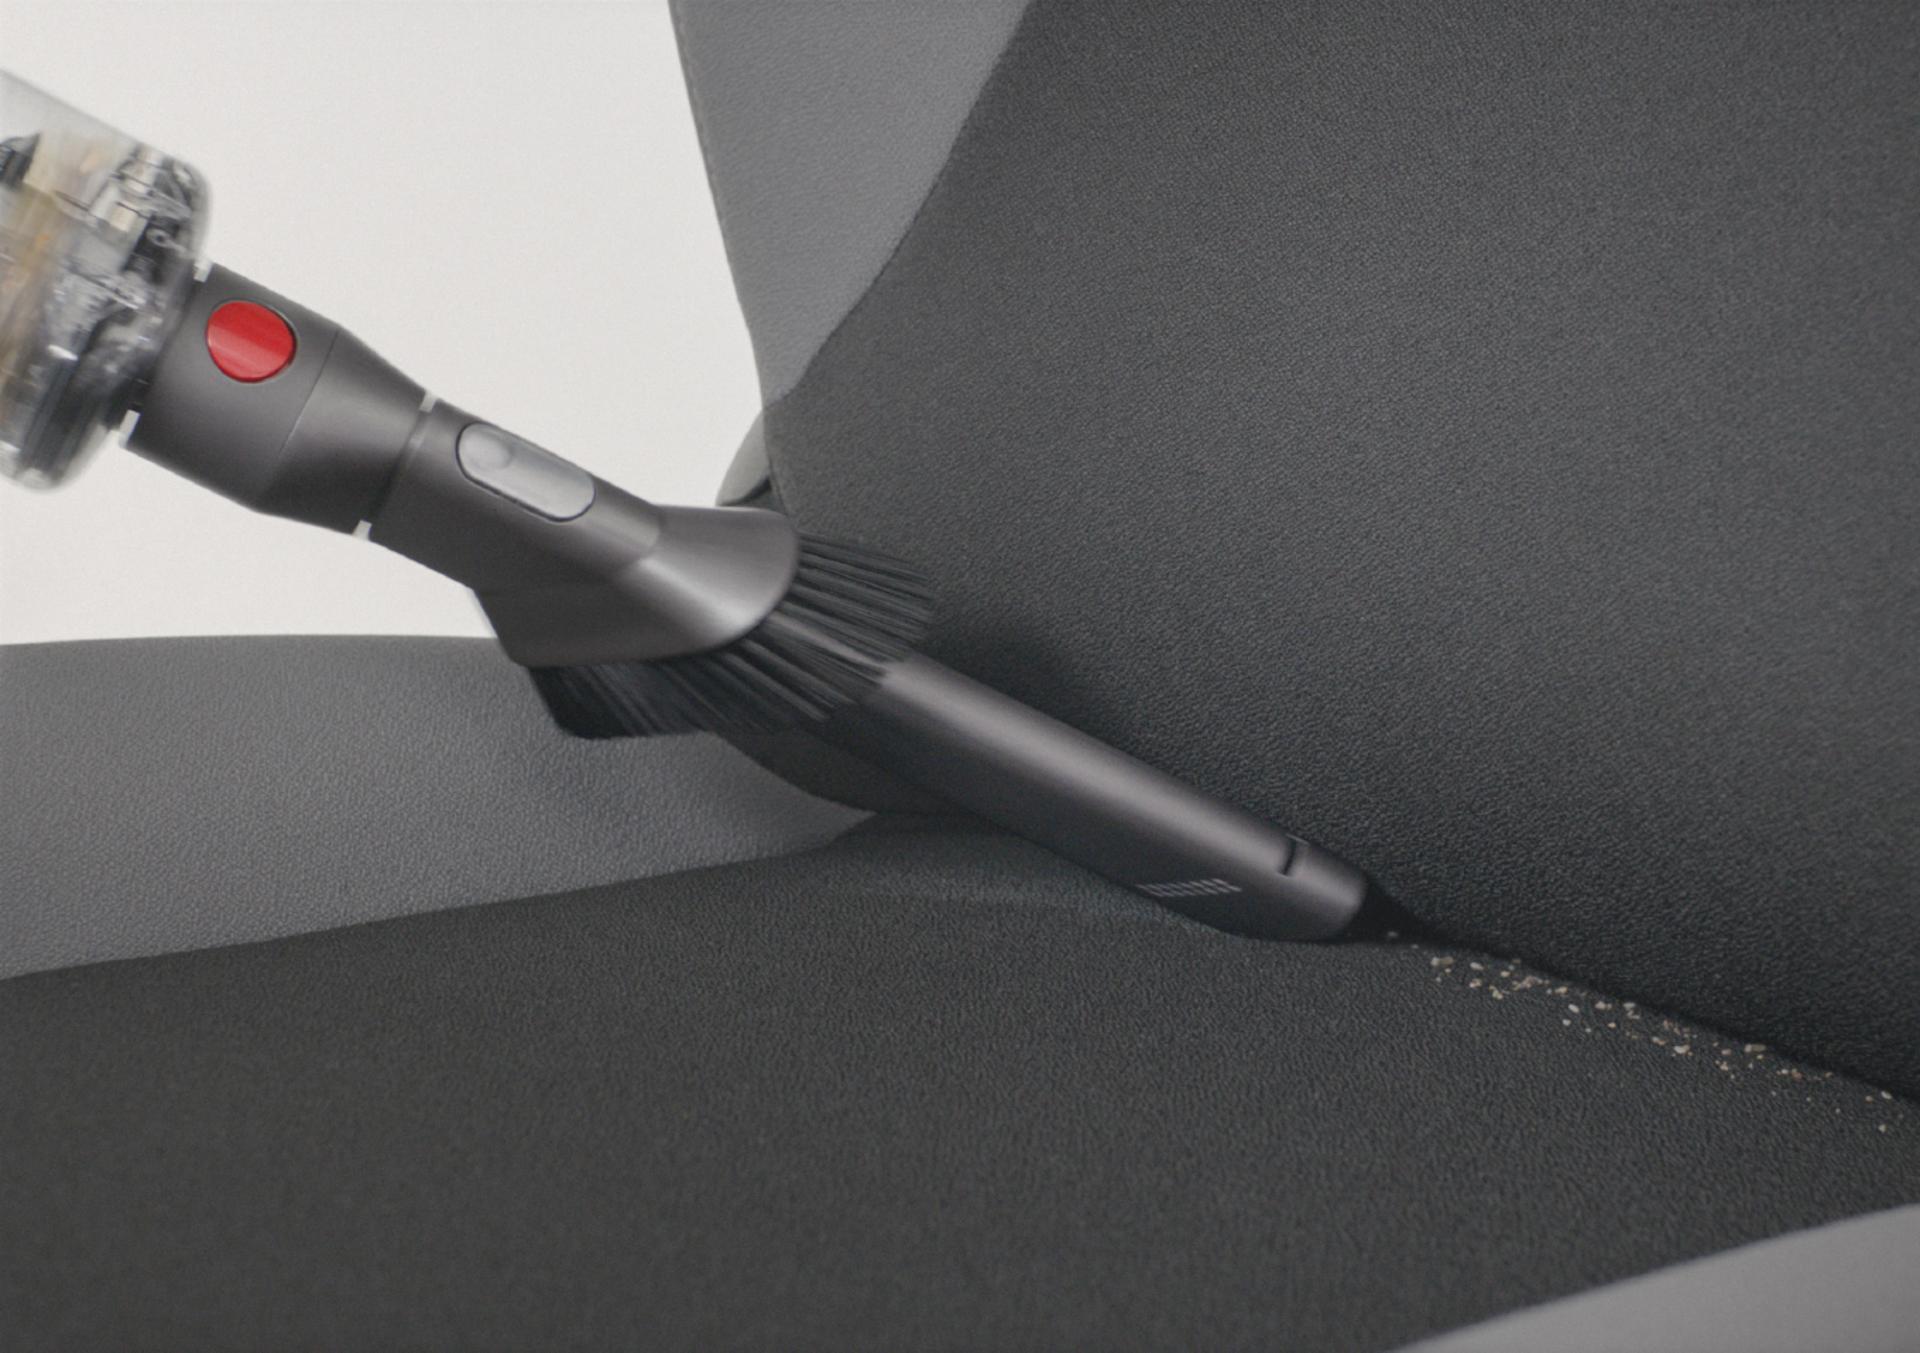 Dyson Omni-glide™ vacuum in handheld mode cleaning a car seat